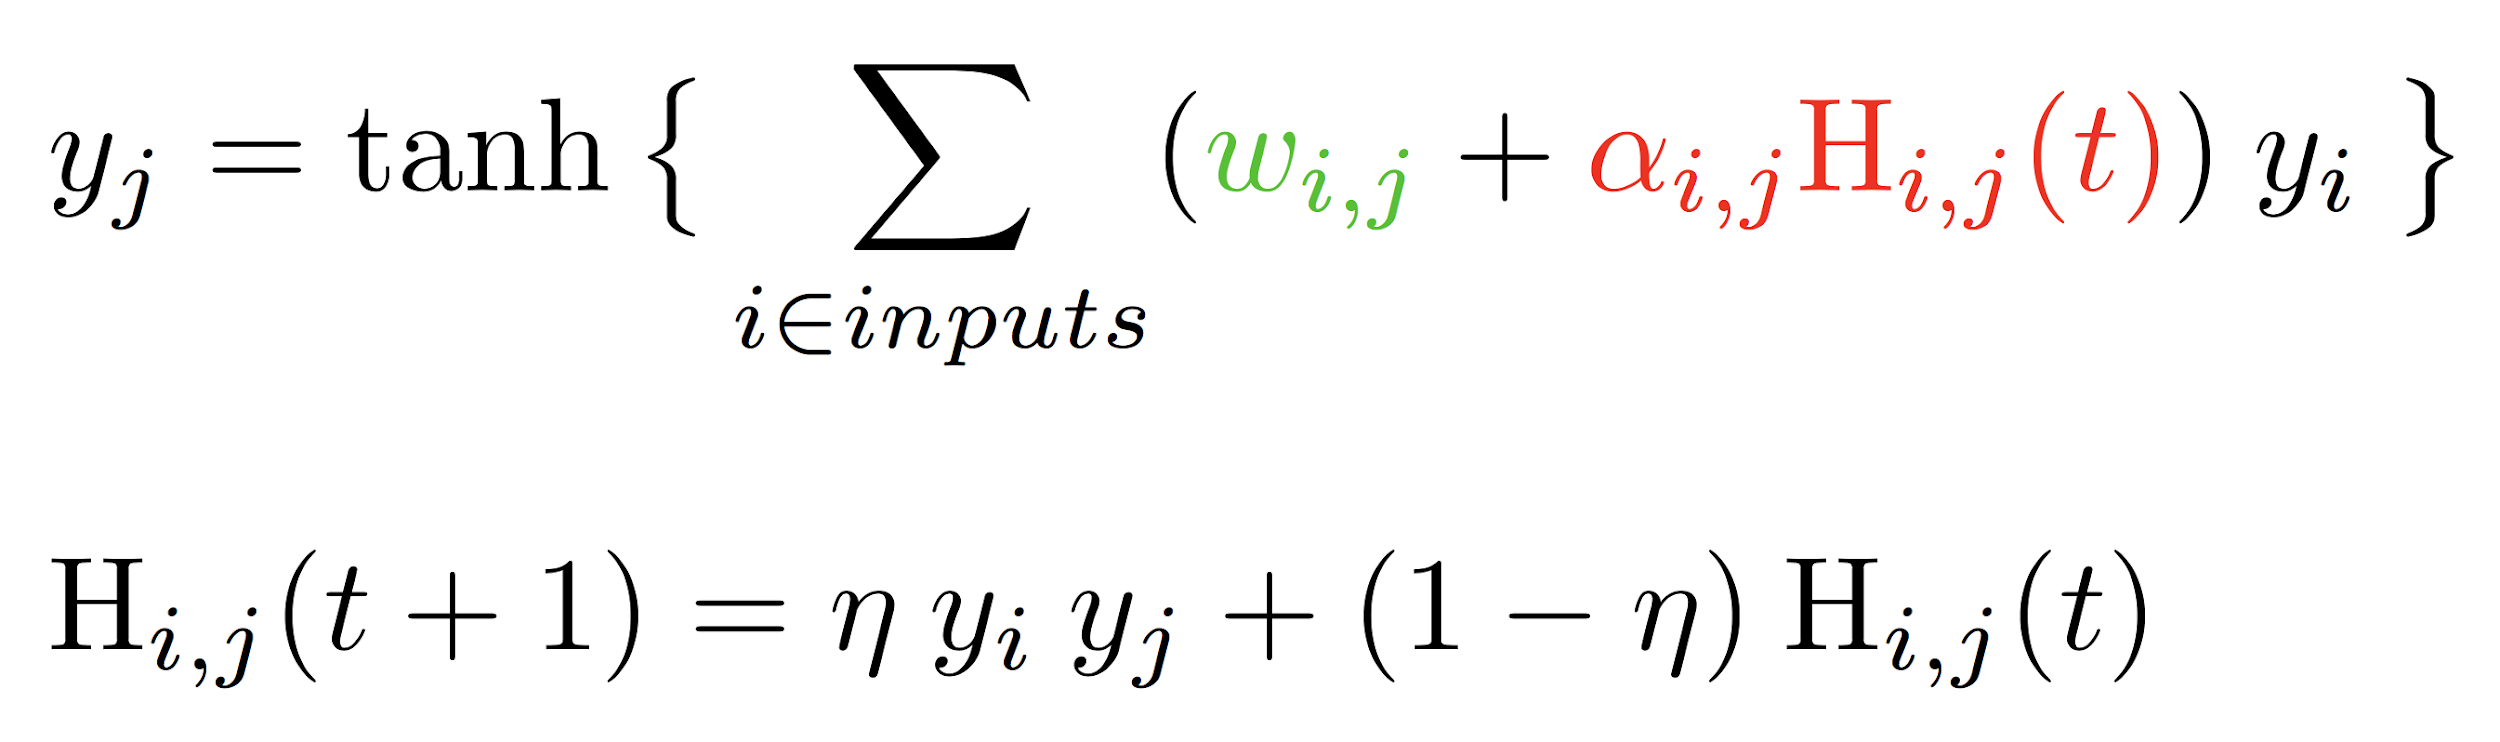 Differentiable Plasticity equation